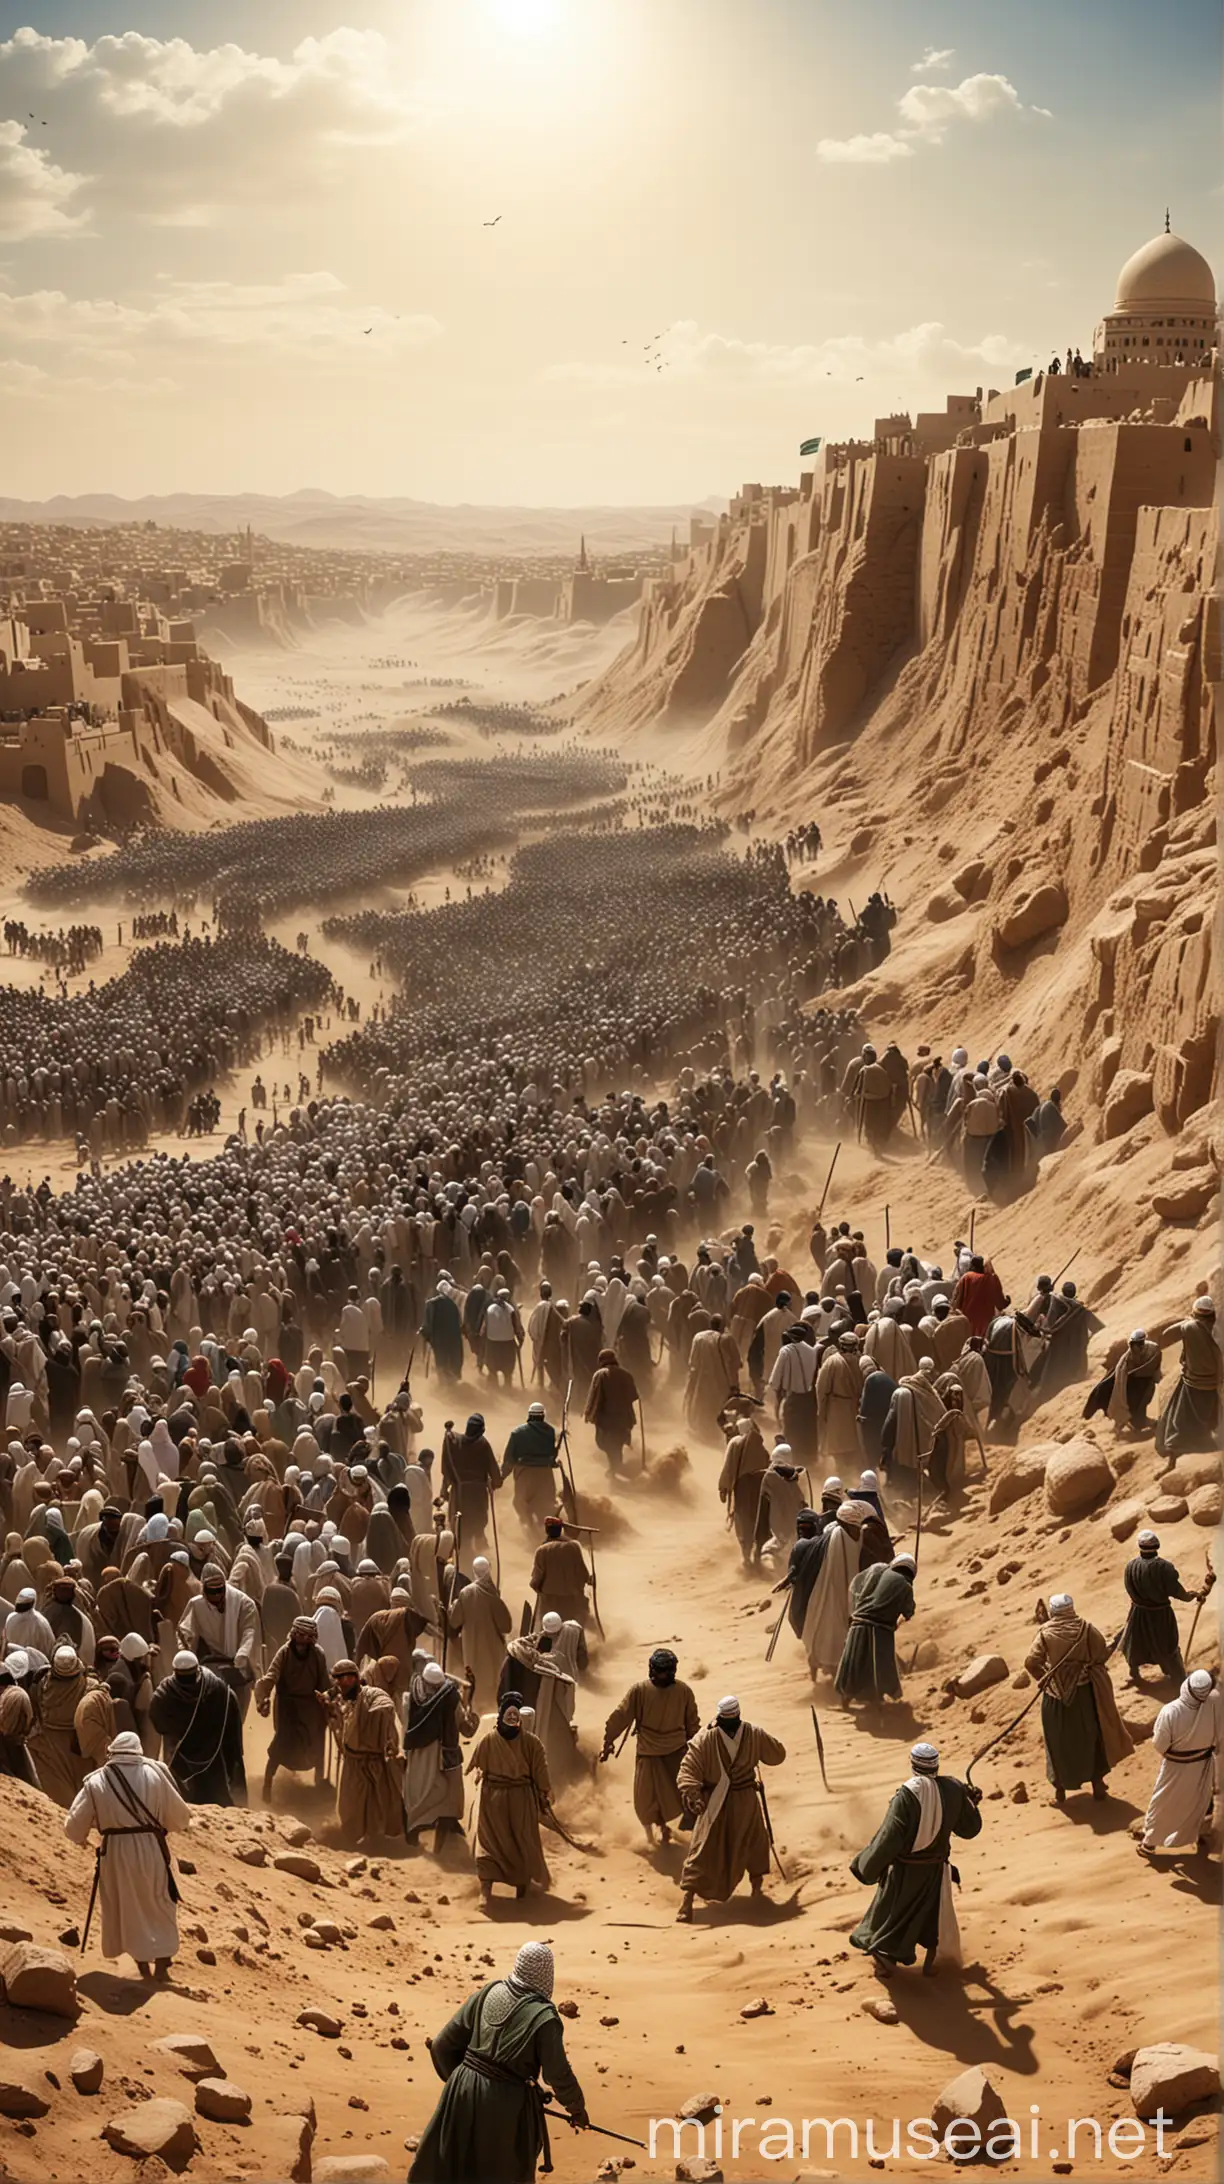 The Battle of the Trench"
Description: A digital illustration depicting the scene of Prophet Muhammad and the Muslims digging a trench around the city of Medina as a defensive strategy. The trench is shown as a prominent feature, with the Quraysh and their allies led by Abu Sufyan approaching in the background. islamic tradition with HD and 4K